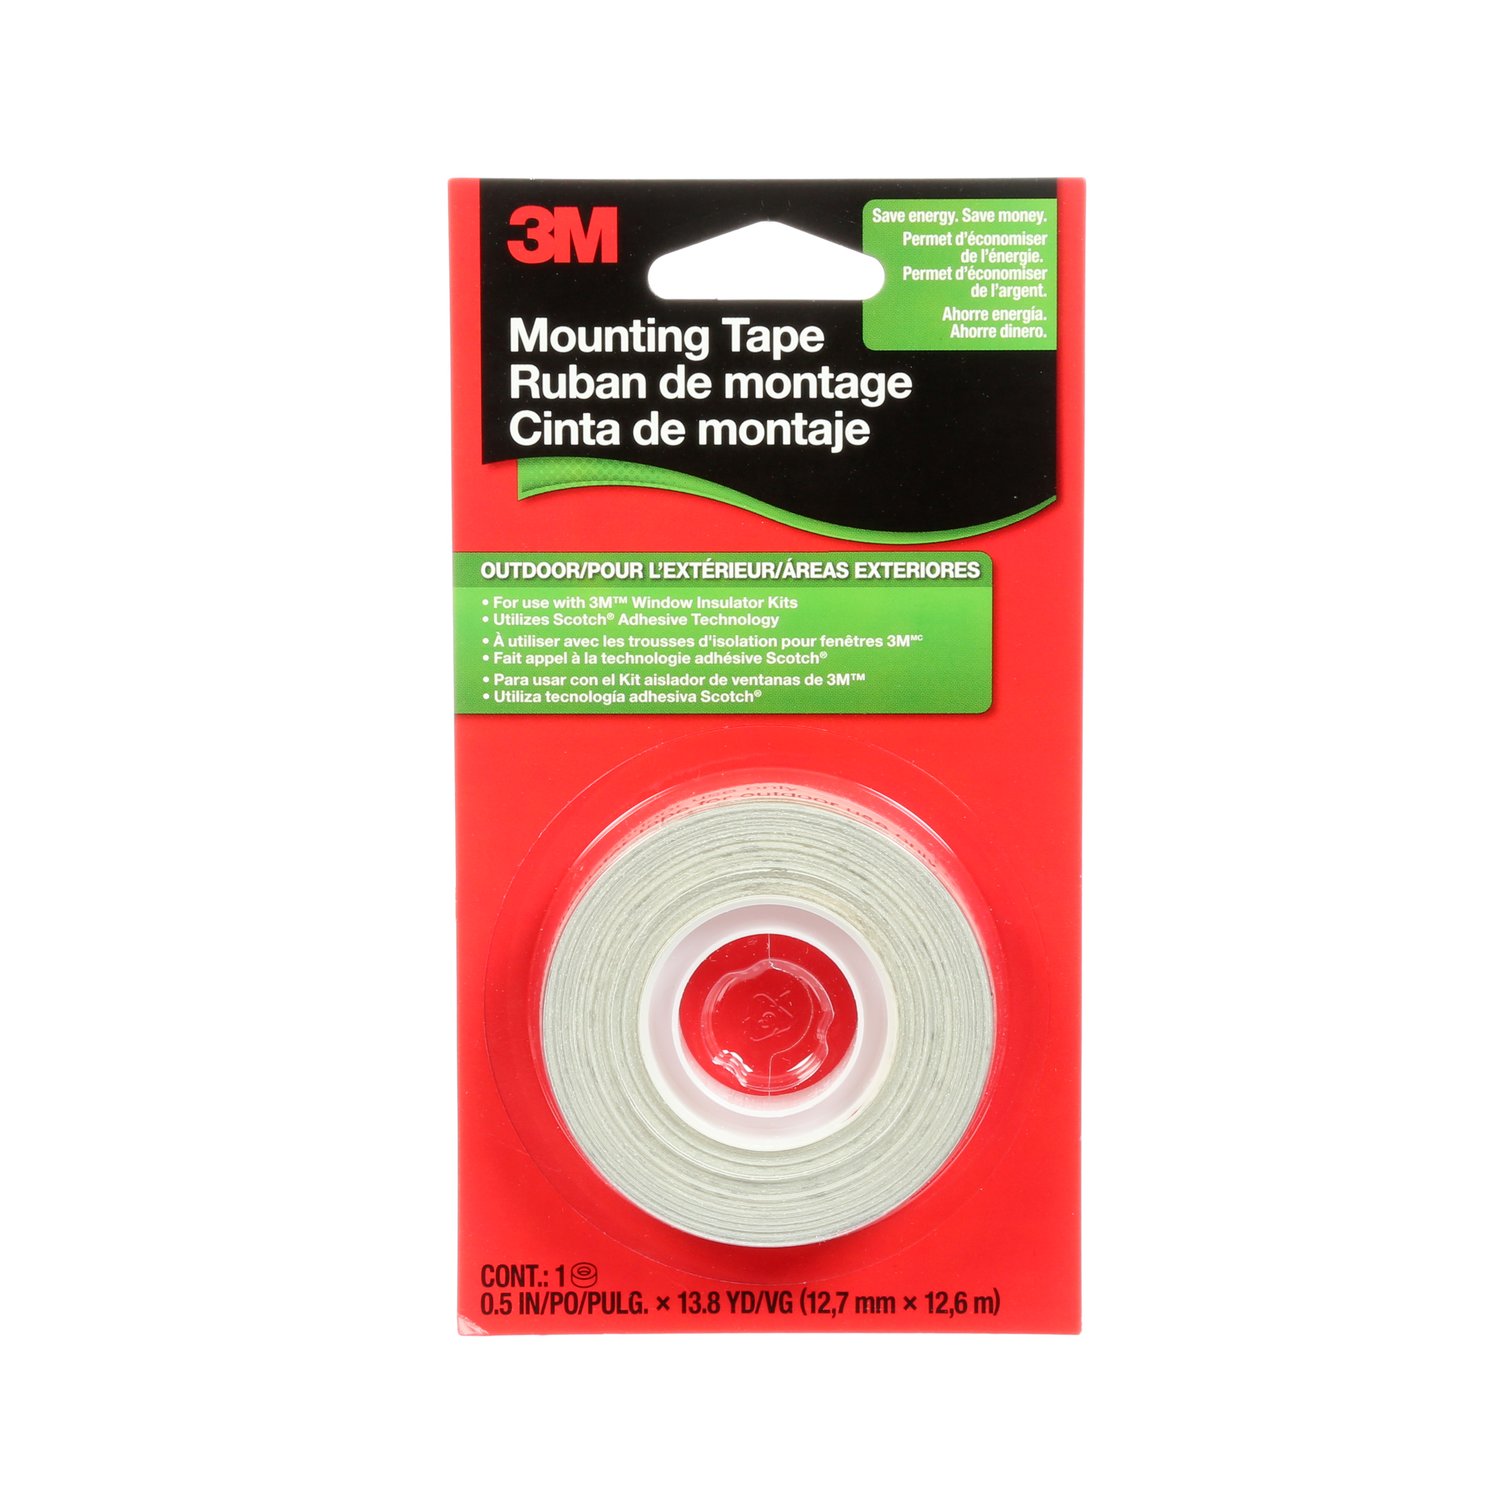 7100075754 - 3M Outdoor Window Film Mounting Tape 2175C, 1/2 in x 13.8 yd, Clear, 1
Roll/Pack